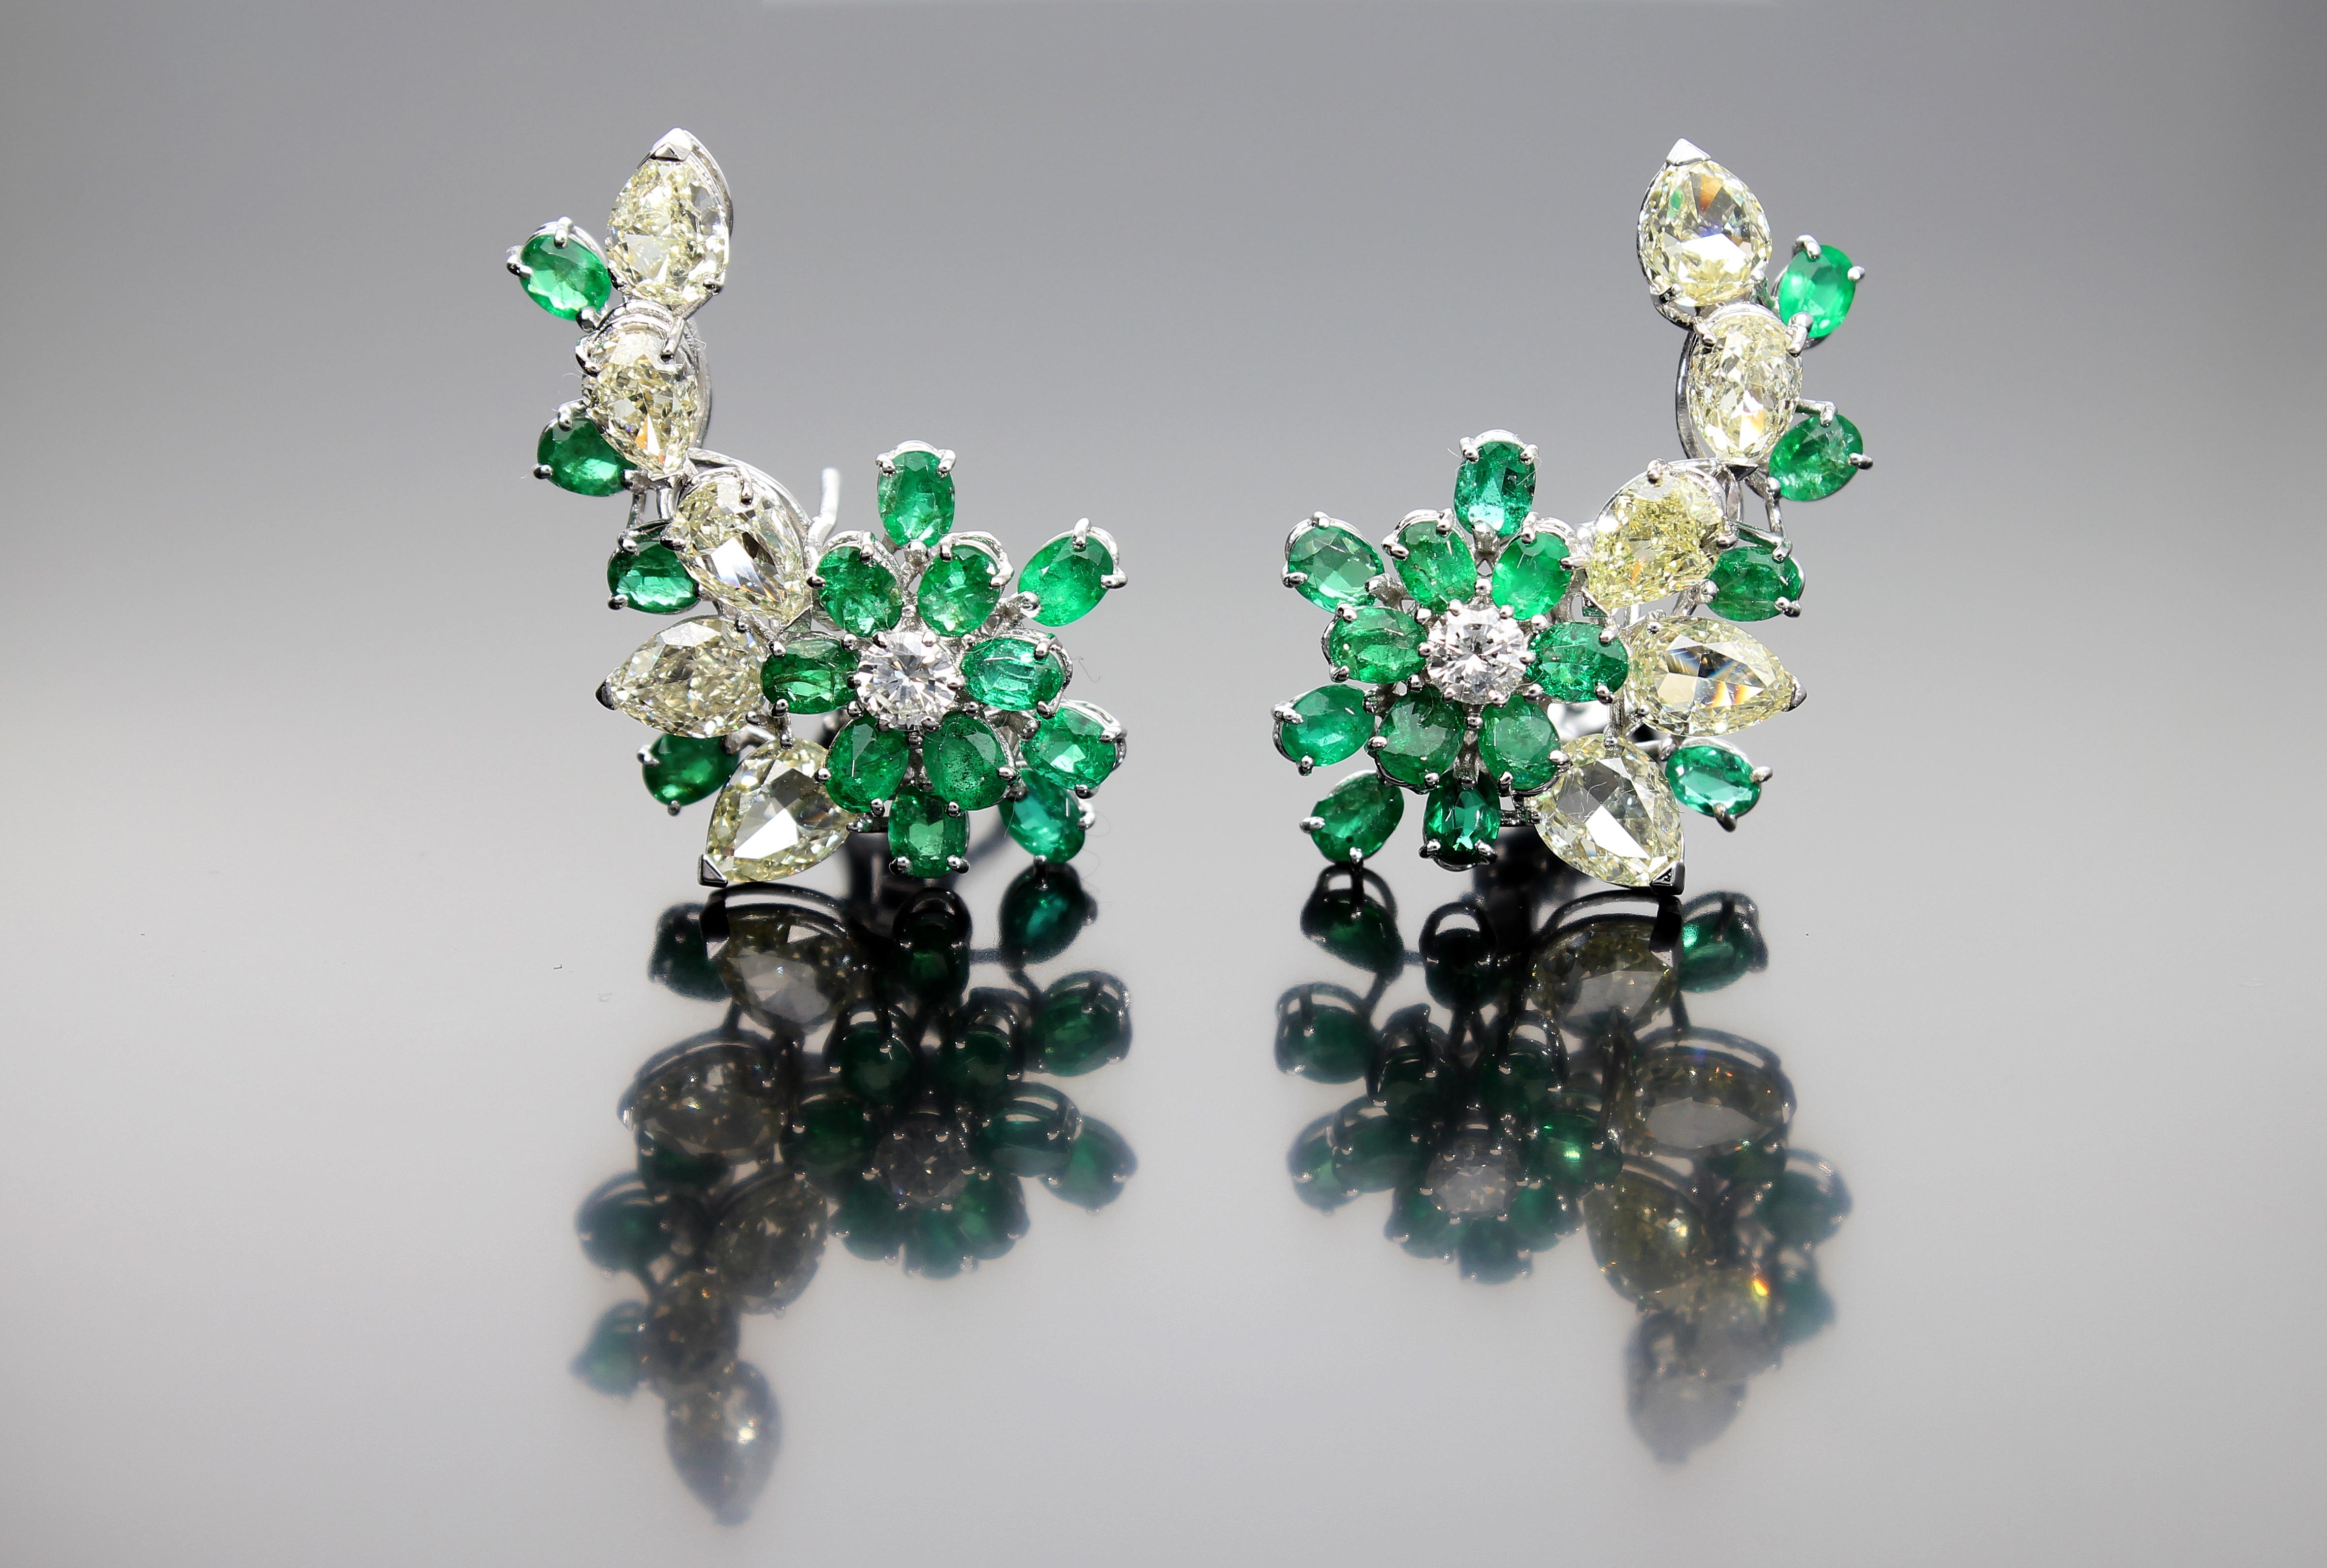 The cluster model earrings with pear-cut diamonds and emeralds, with two brilliant-cut diamonds in the center. N ° 10 pear cut diamonds total weight 8.50 ct
N ° 30 pear cut emeralds total weight 4.90 ct
N ° 2 brilliant cut diamonds total weight 0.48